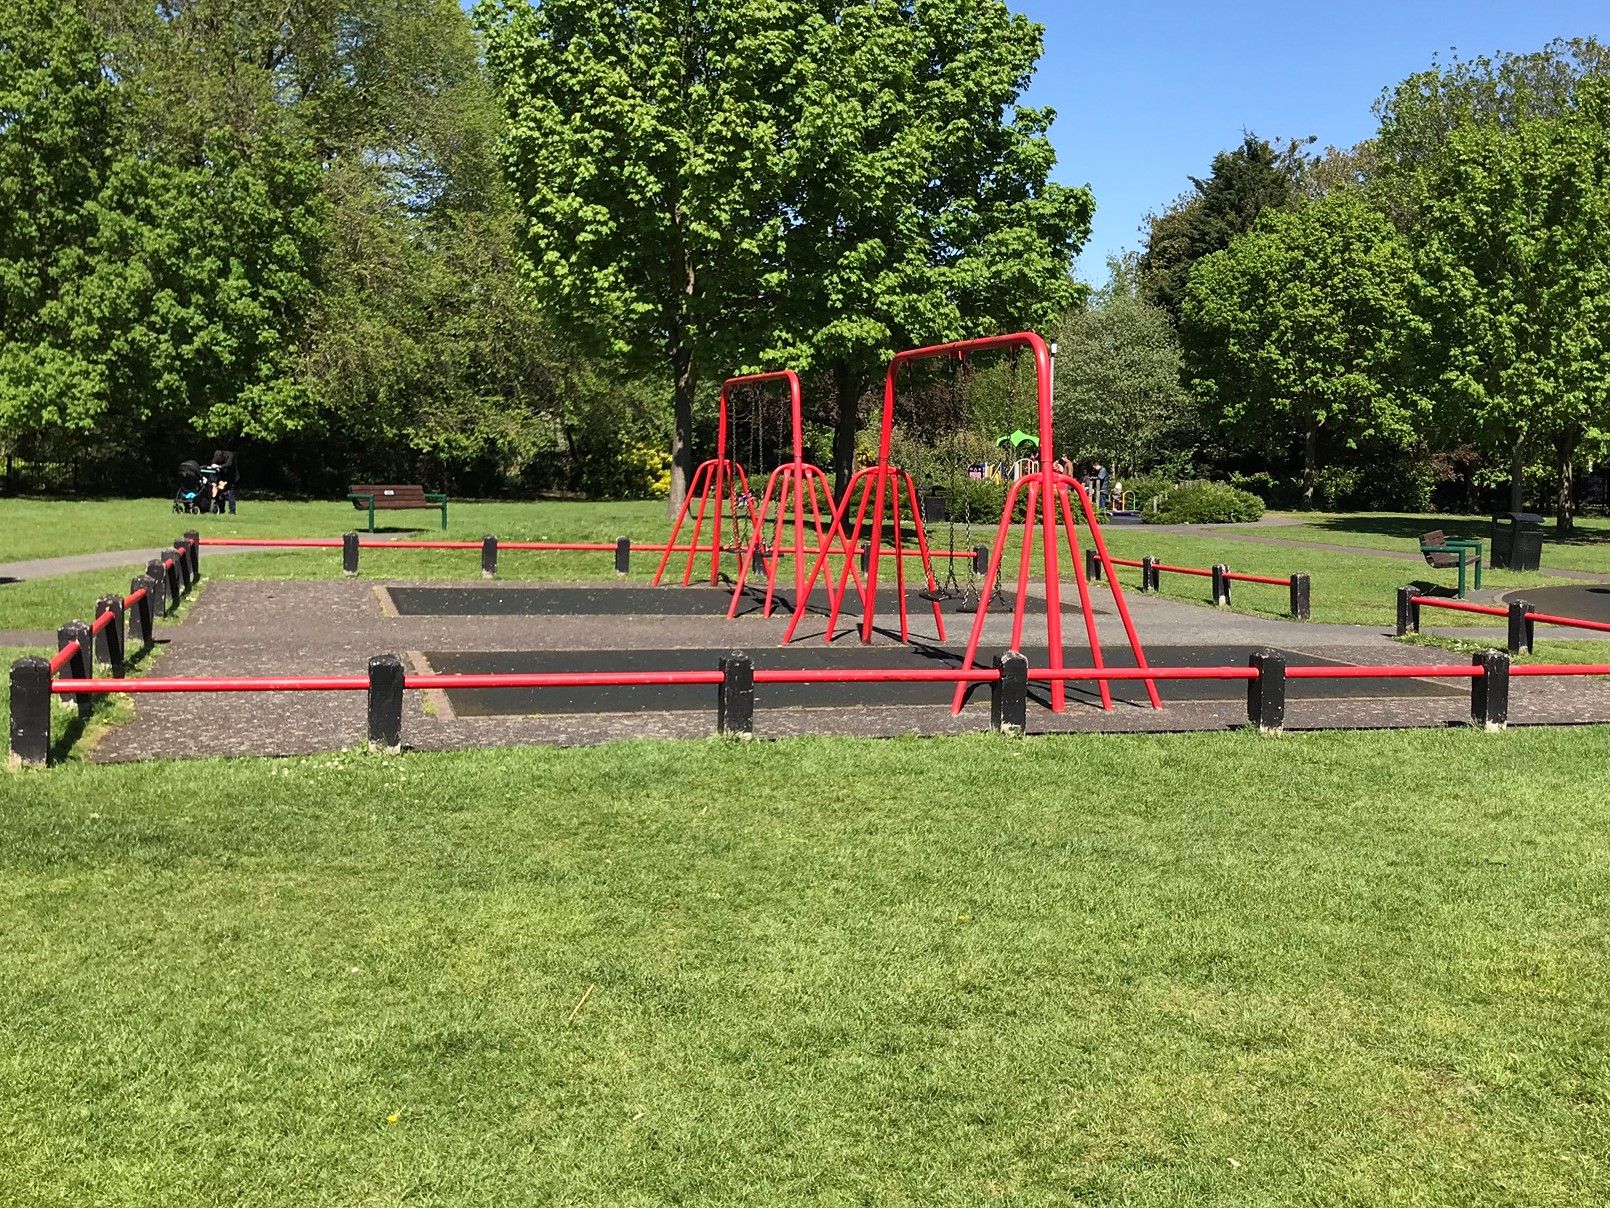 Swing sets in the children's play area